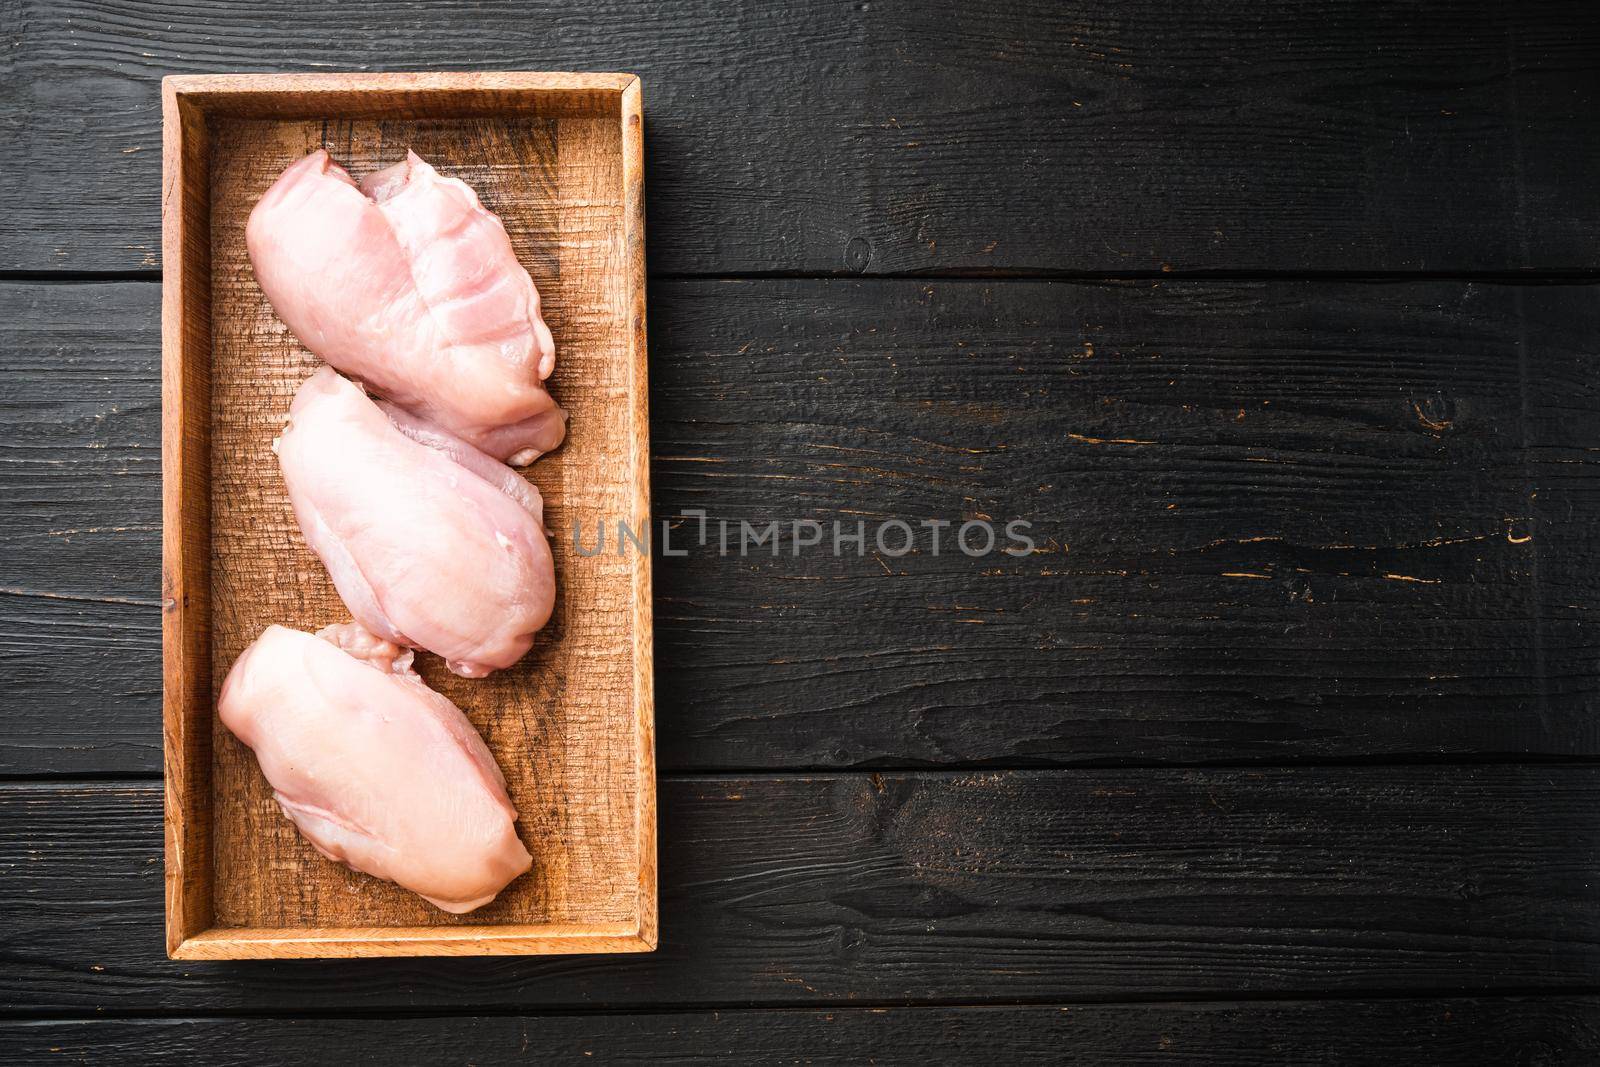 Raw organic chicken Breasts set, in wooden box, on black wooden table background, top view flat lay, with copy space for text